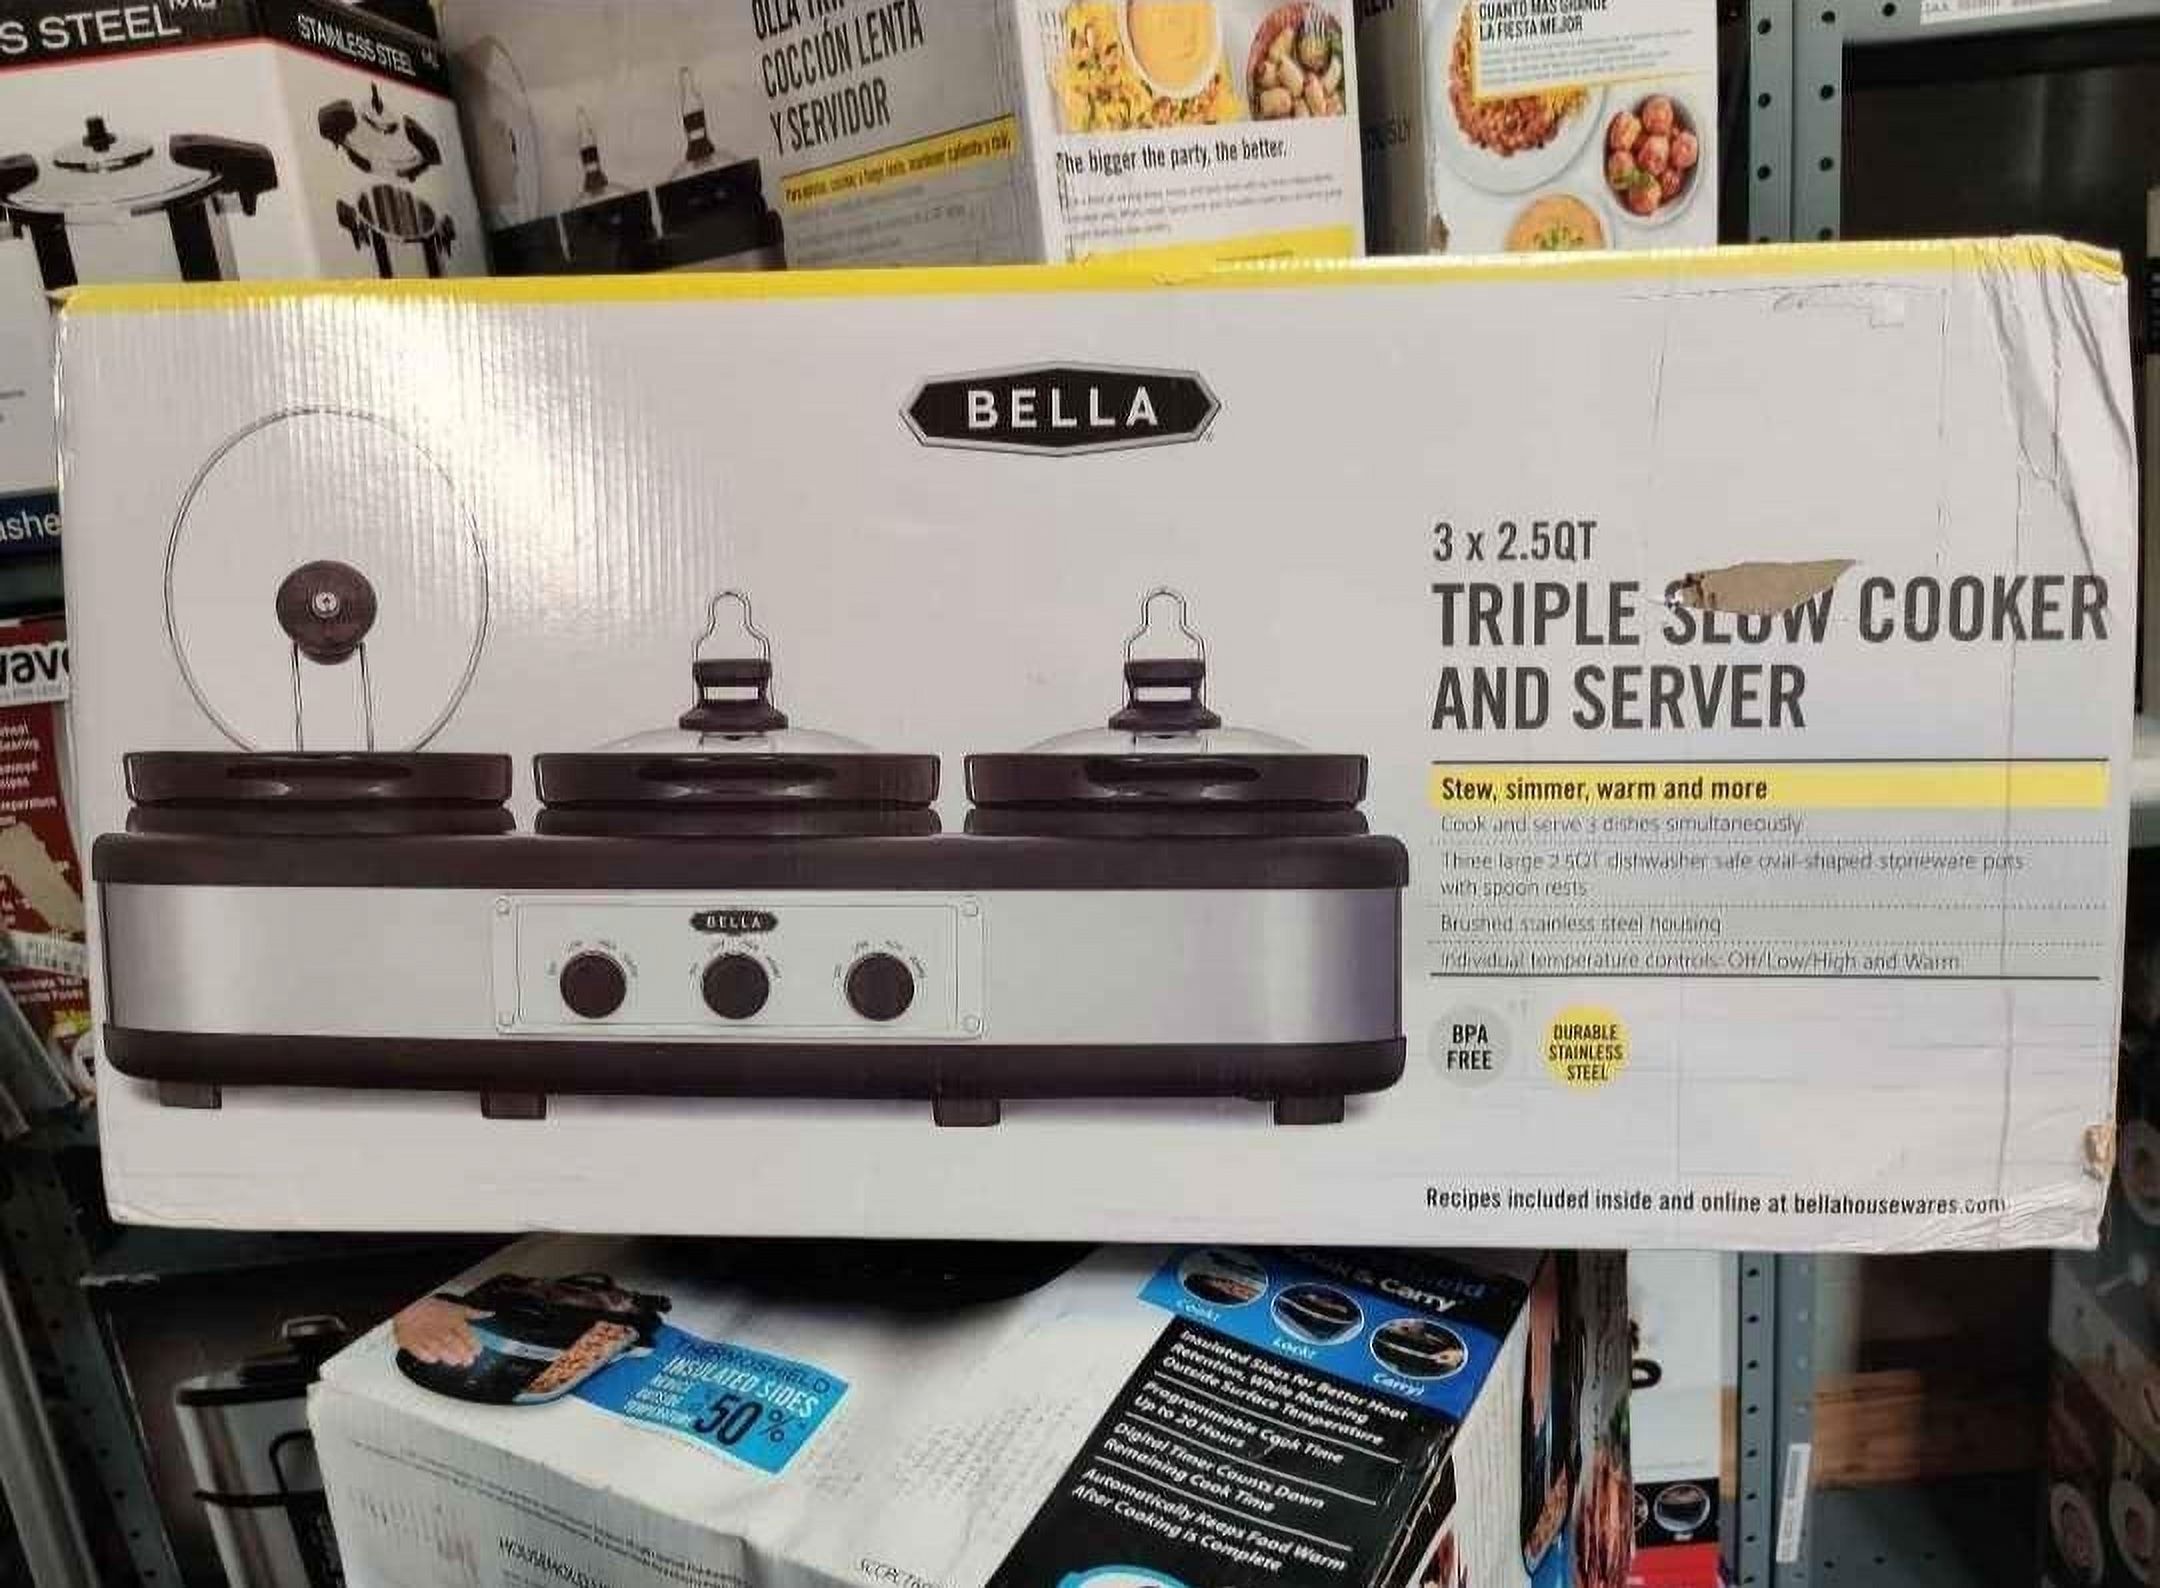 Bella 3x2.5 quart Triple Slow Cooker Stainless Steel/Black Boxes not in perfect condition - image 4 of 5